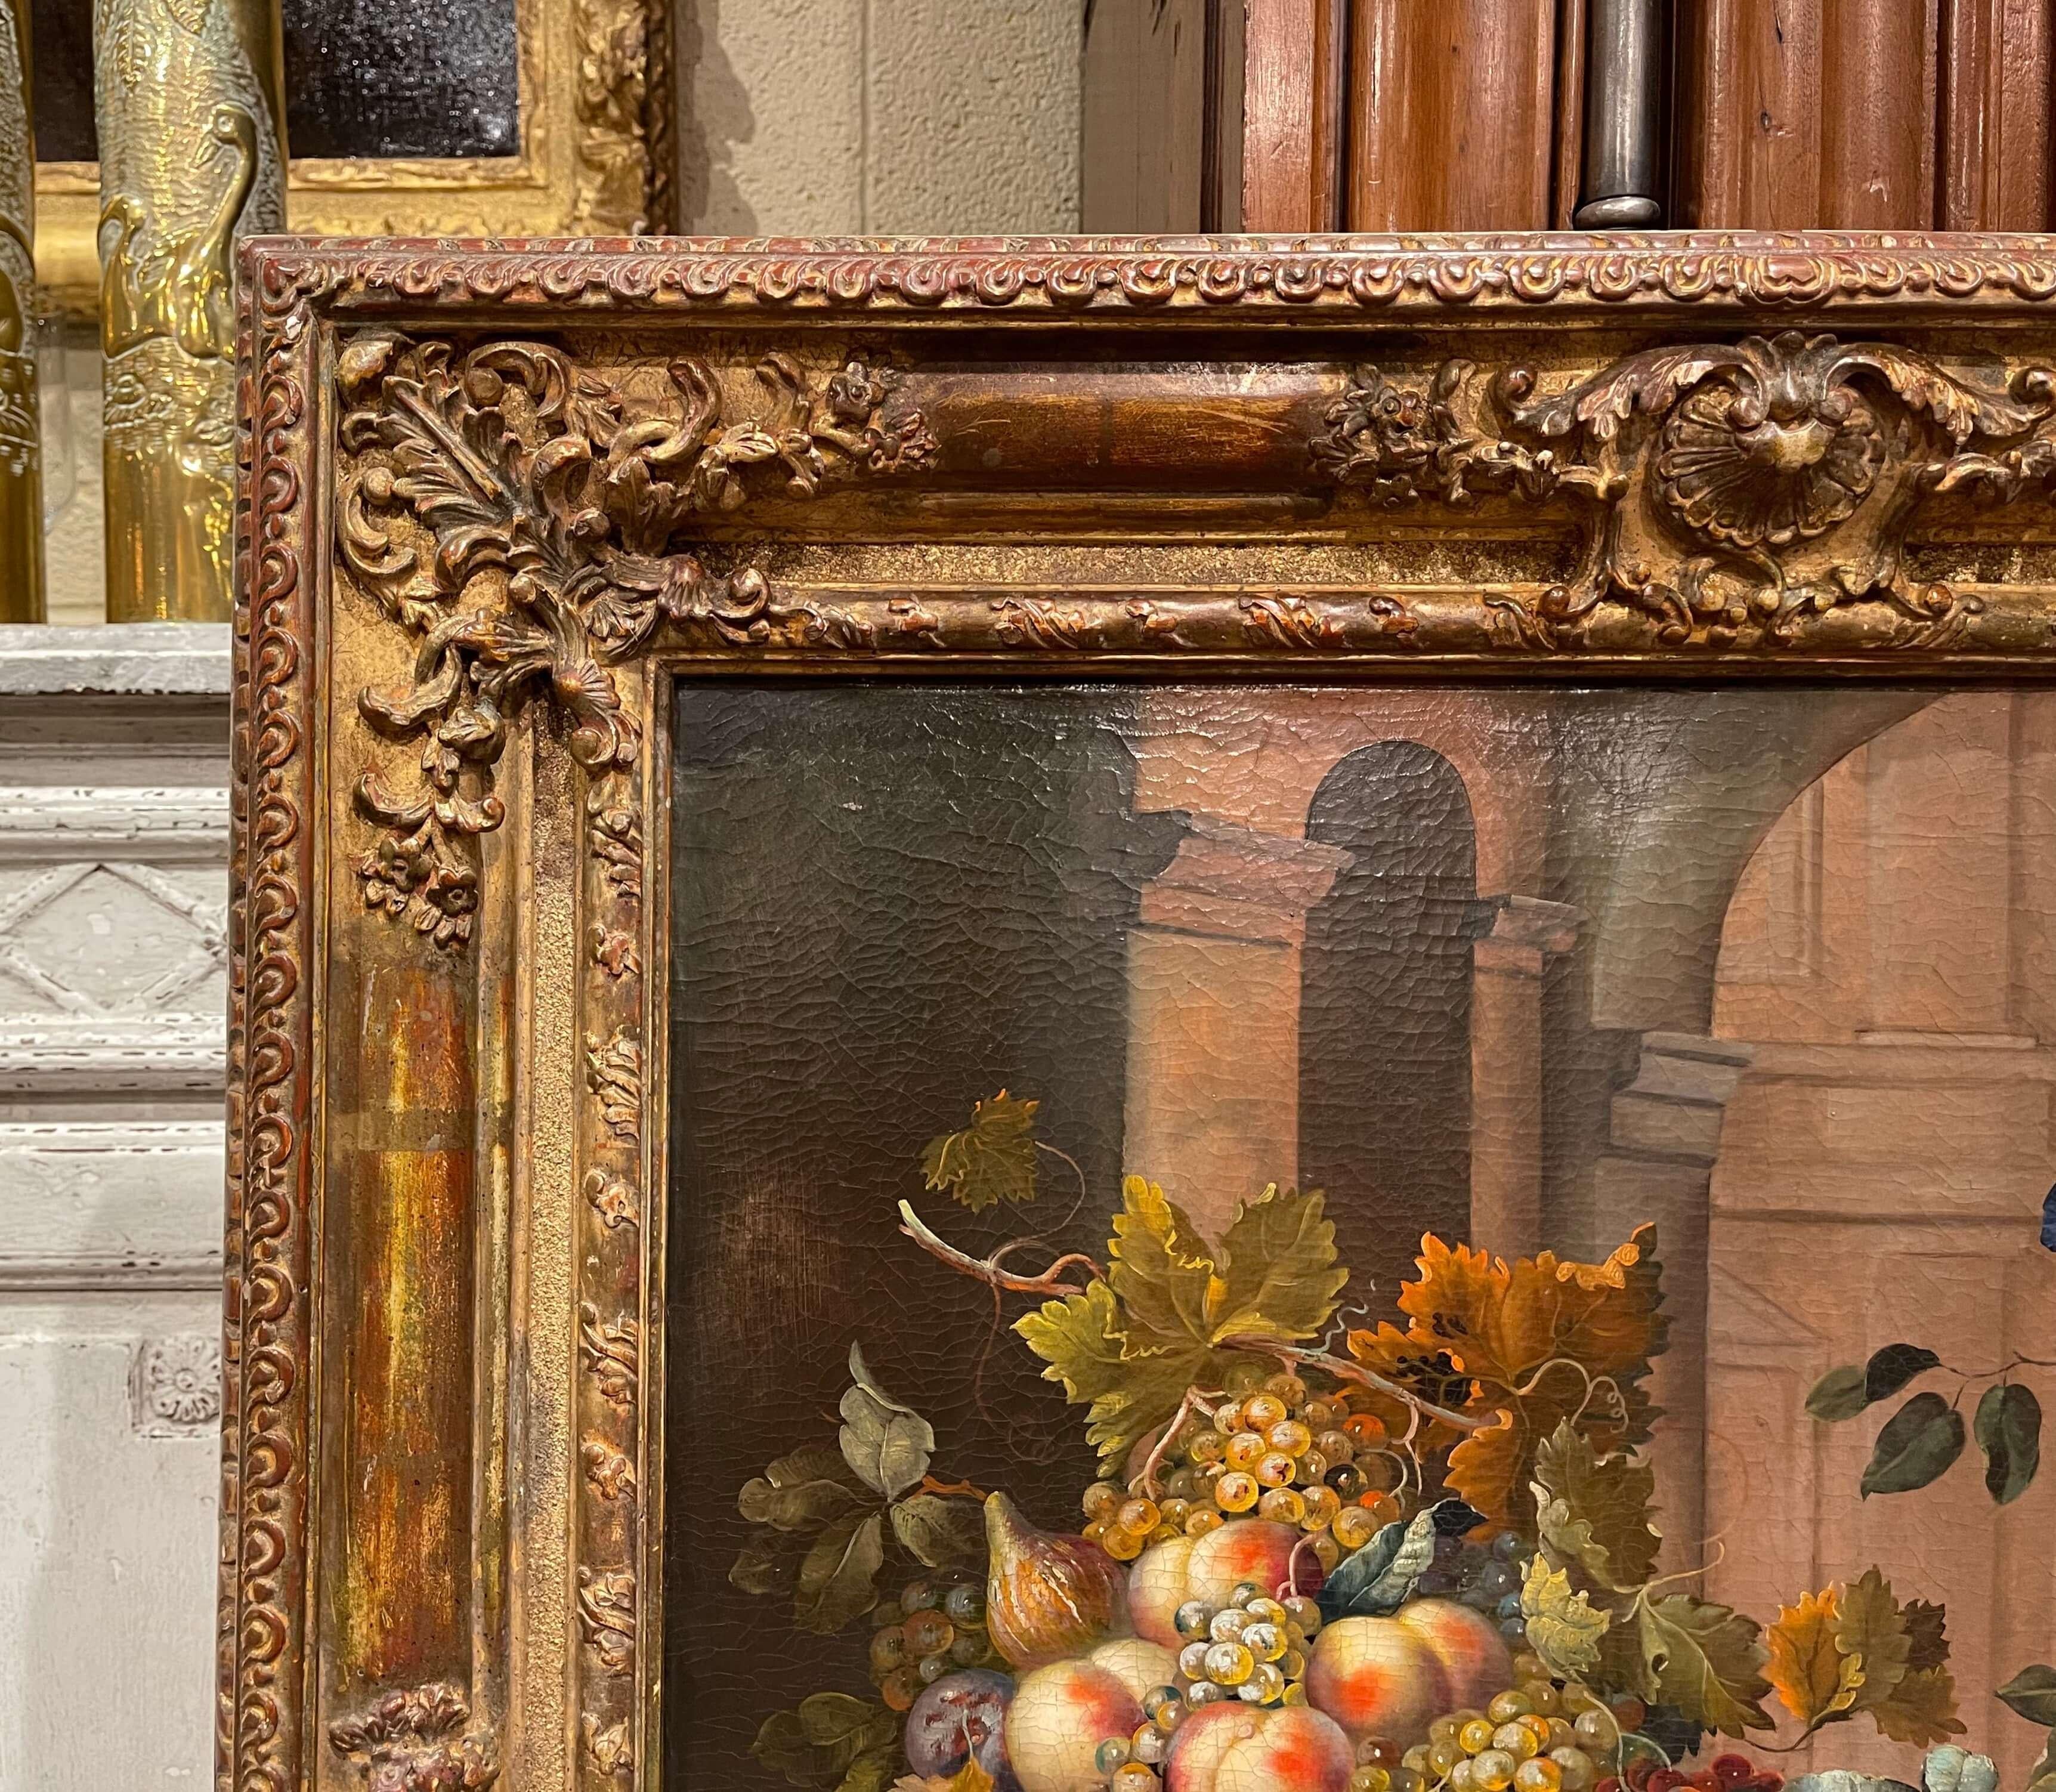 Canvas 19th Century French Still Life Oil Painting in Gilt Frame Signed D. Giuseppe For Sale